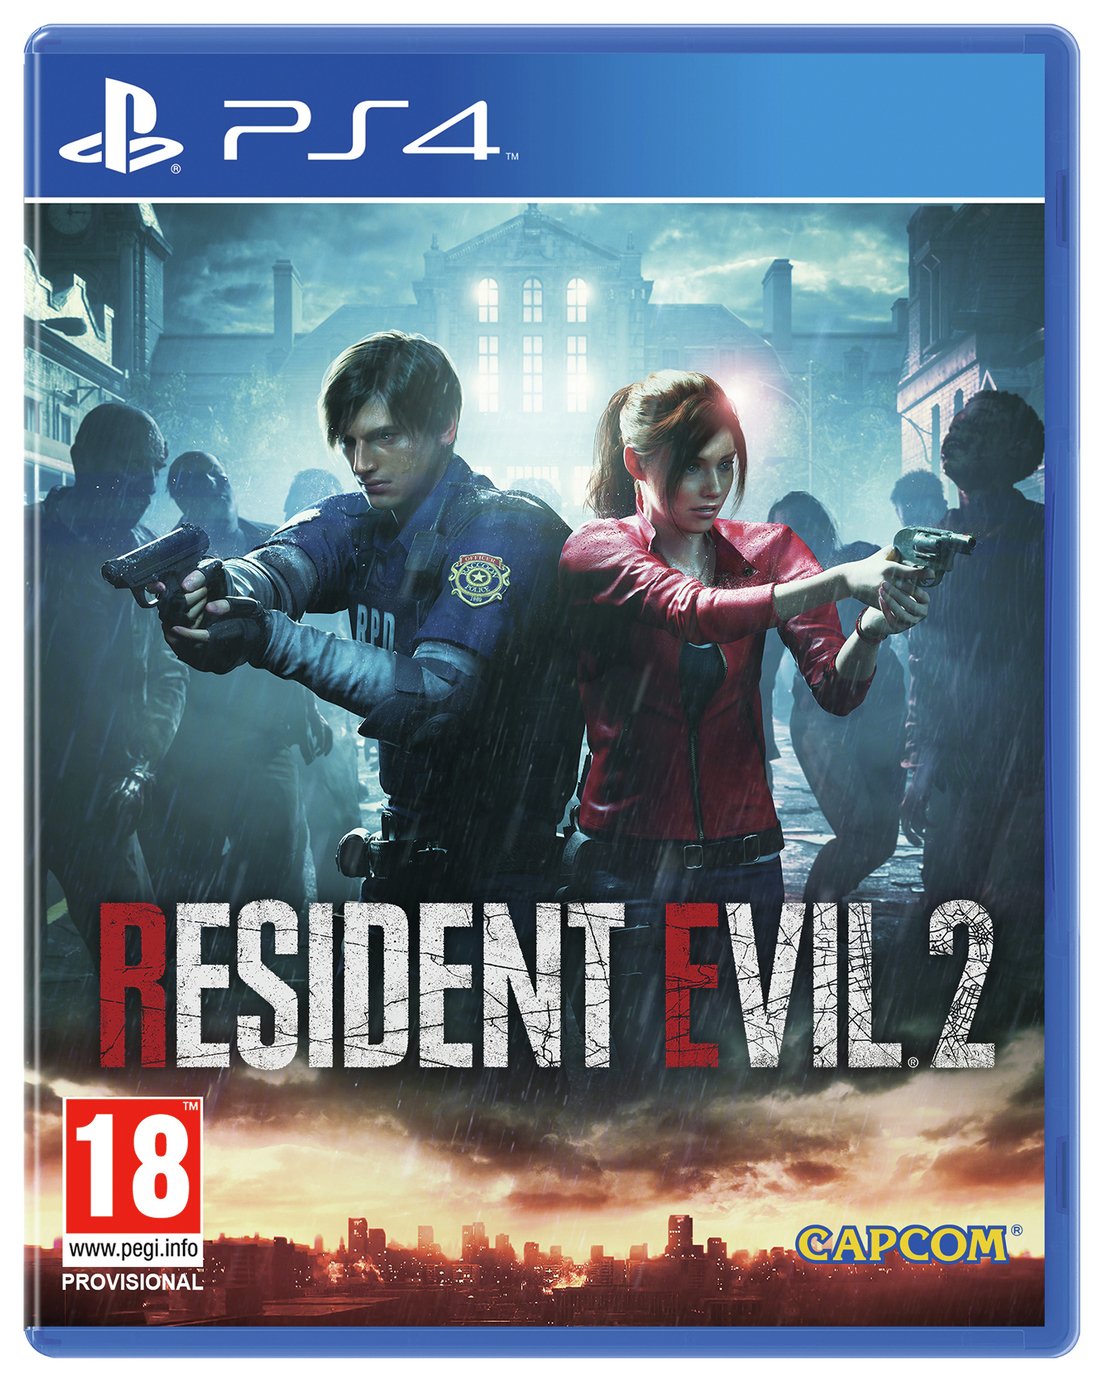 How Much Is Resident Evil 8 On Ps4